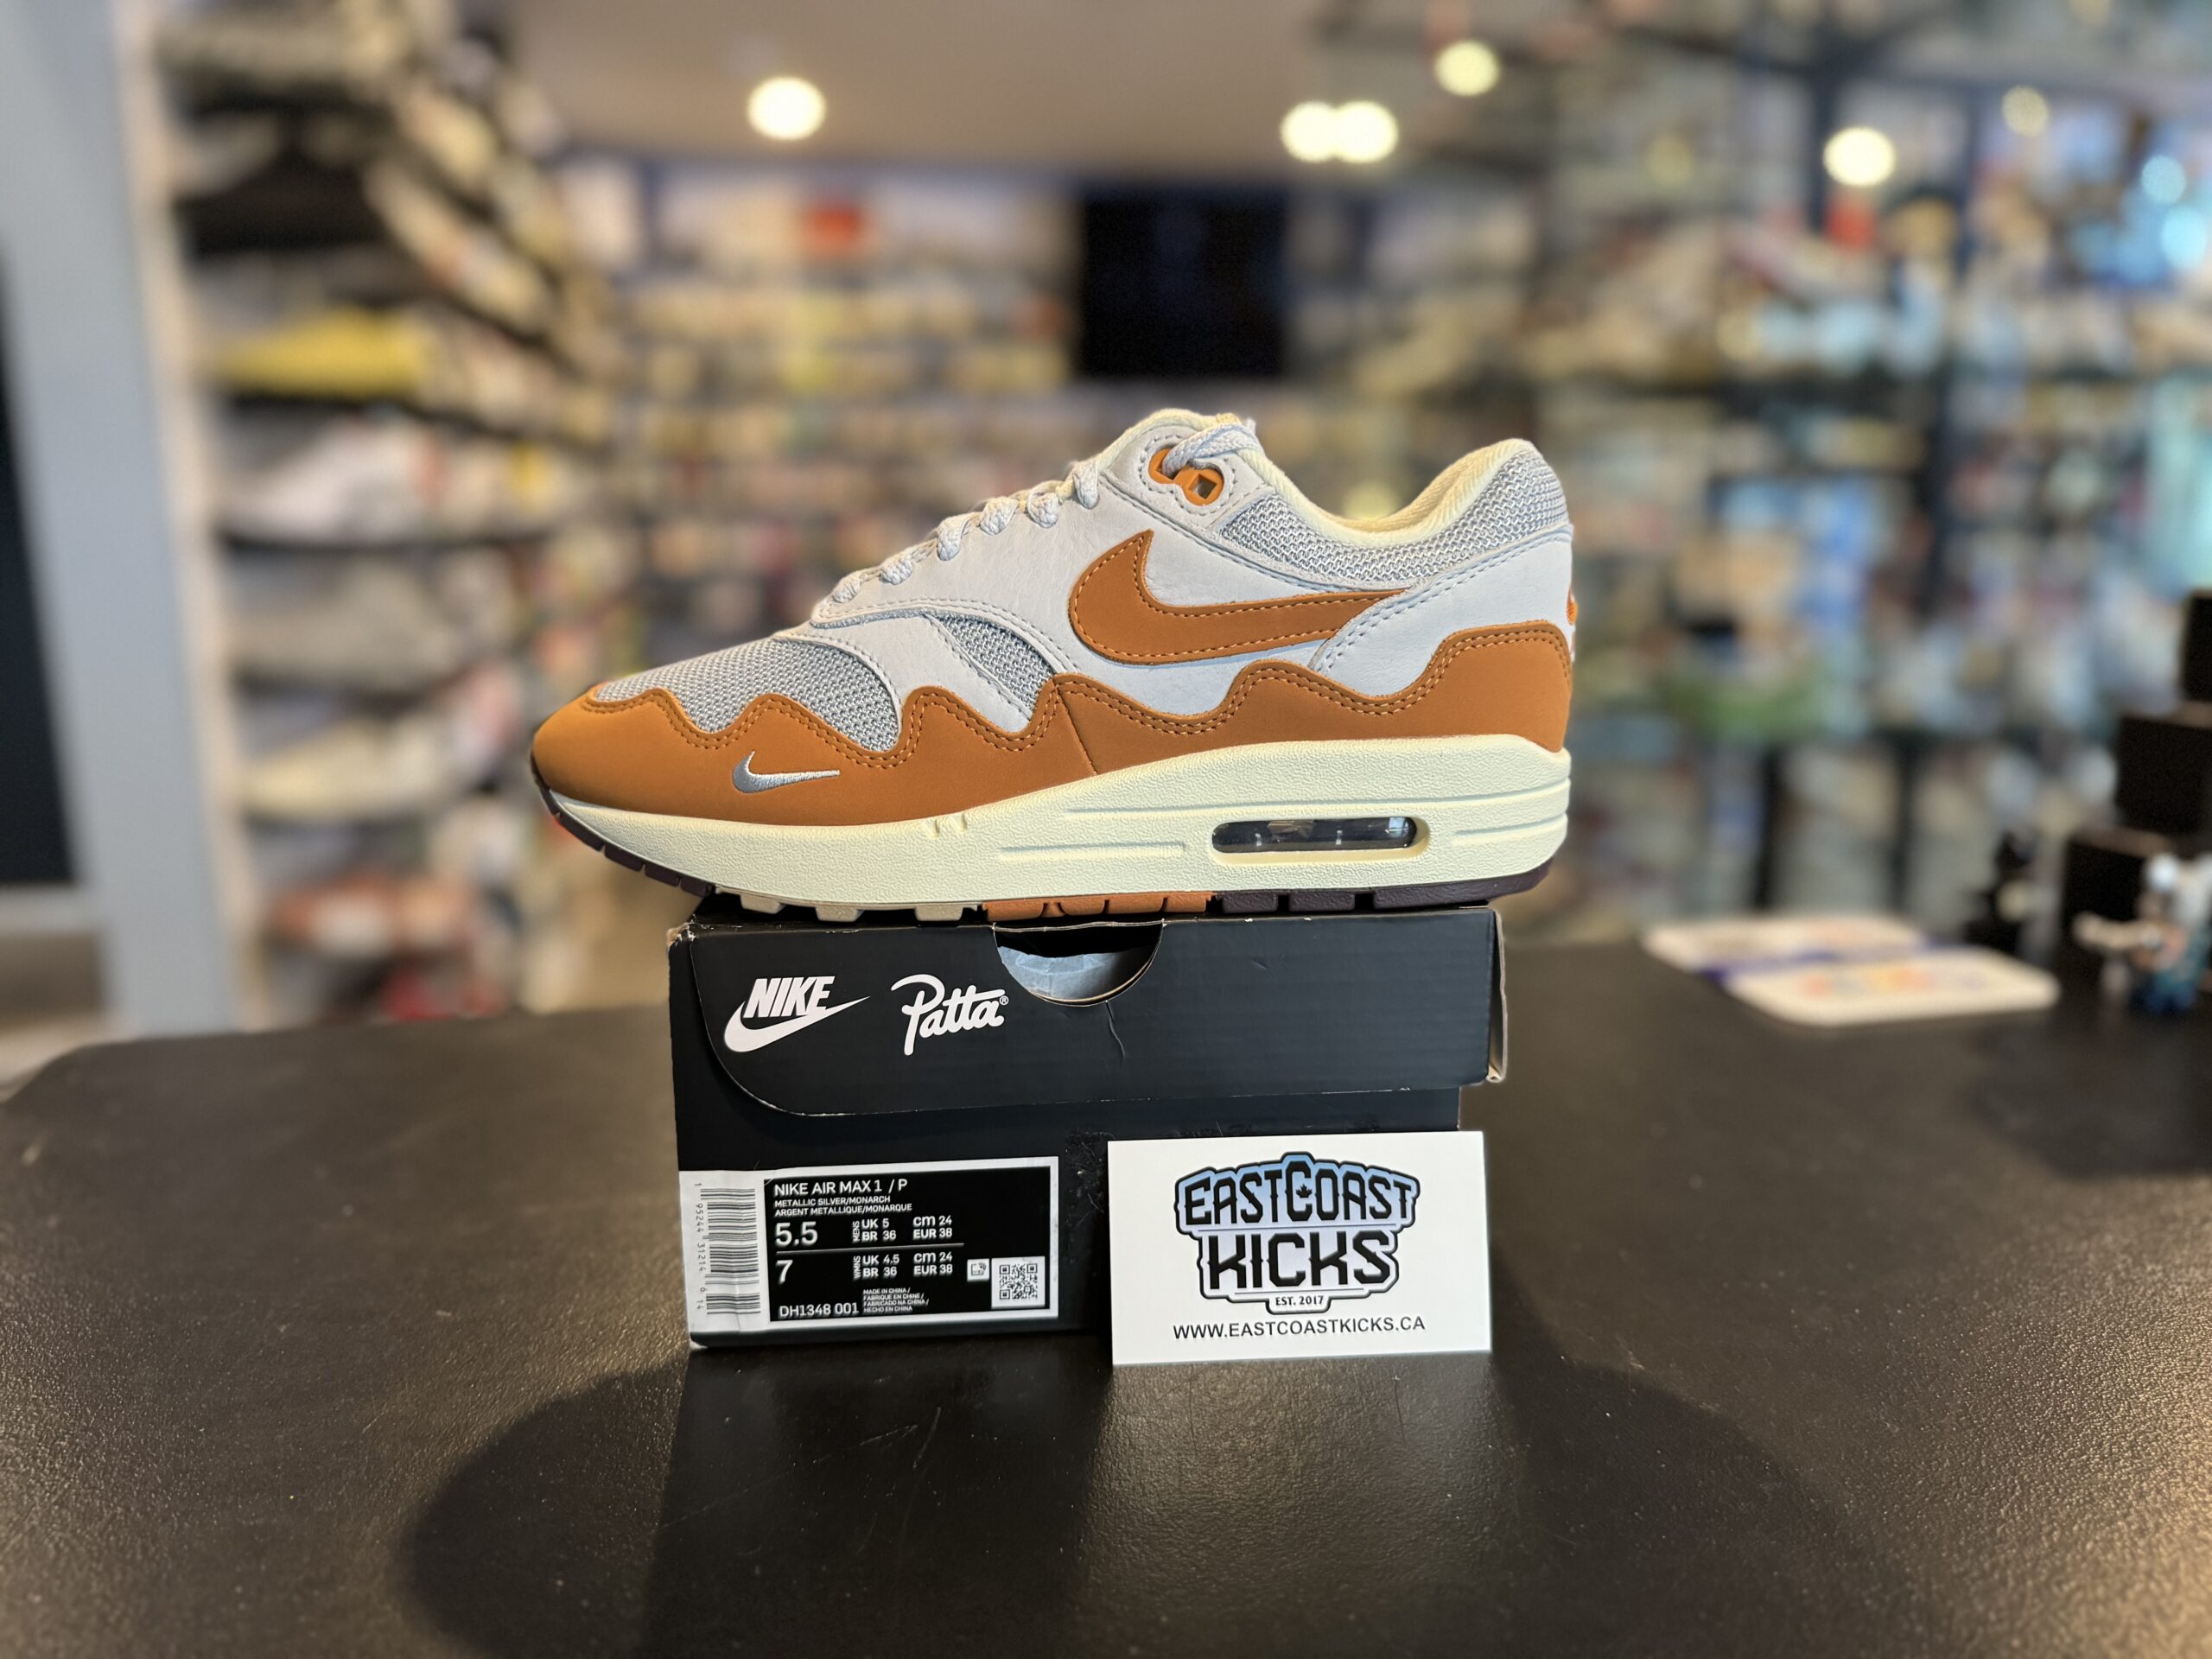 Nike Air Max 1 Patta Waves Monarch (Without Bracelet) Size 5.5